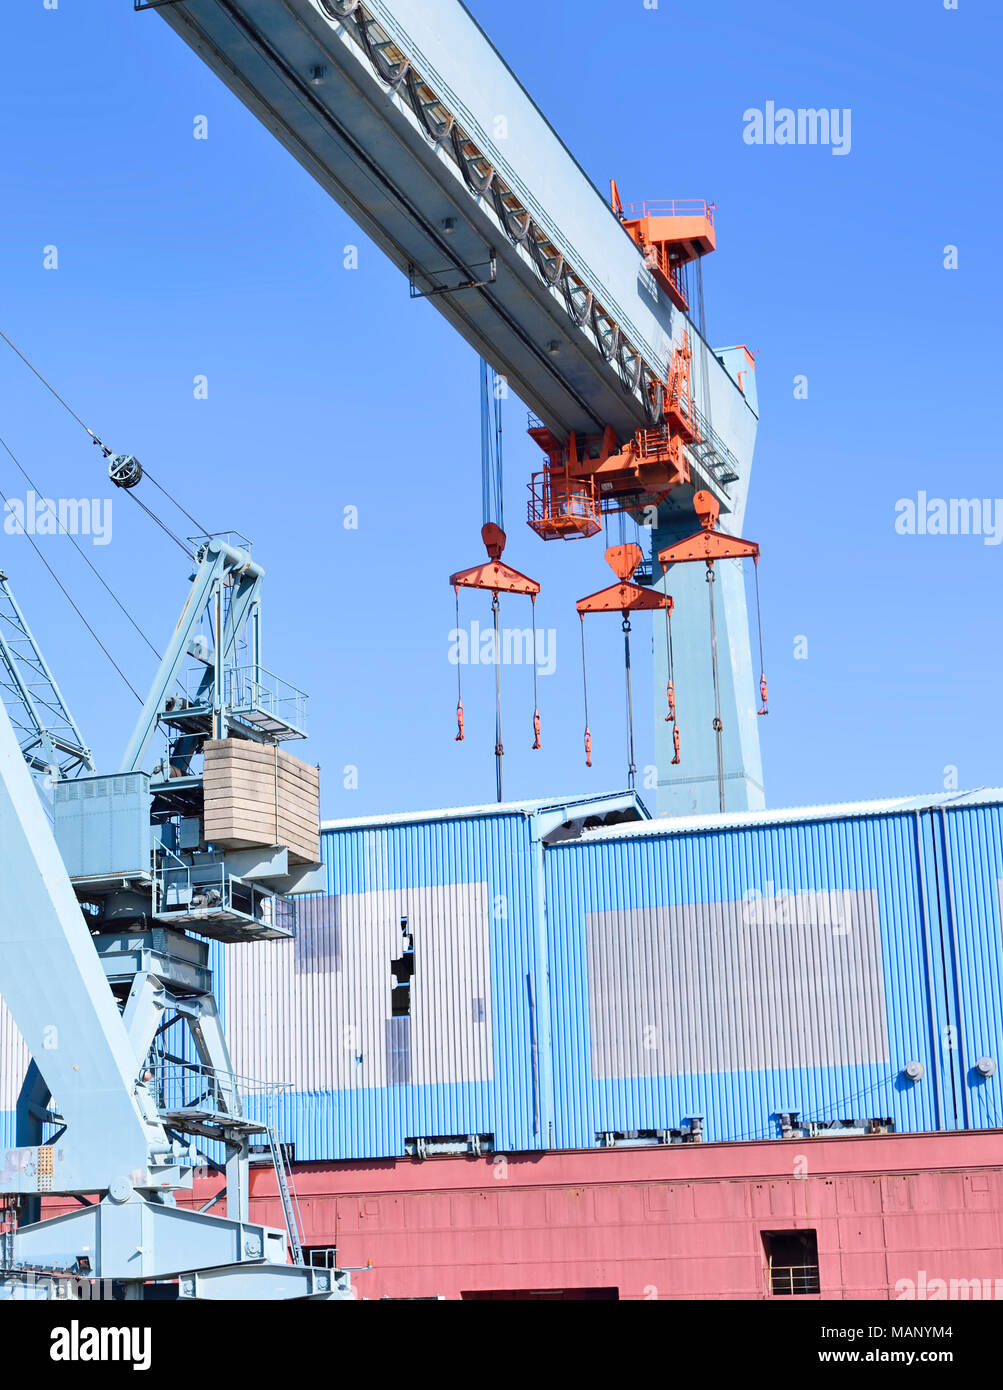 Container harbor with harbor cranes or freight cranes. Warf or cargo shipping scene, industrial transportation or shipping scene. Hamburg harbor. Stock Photo